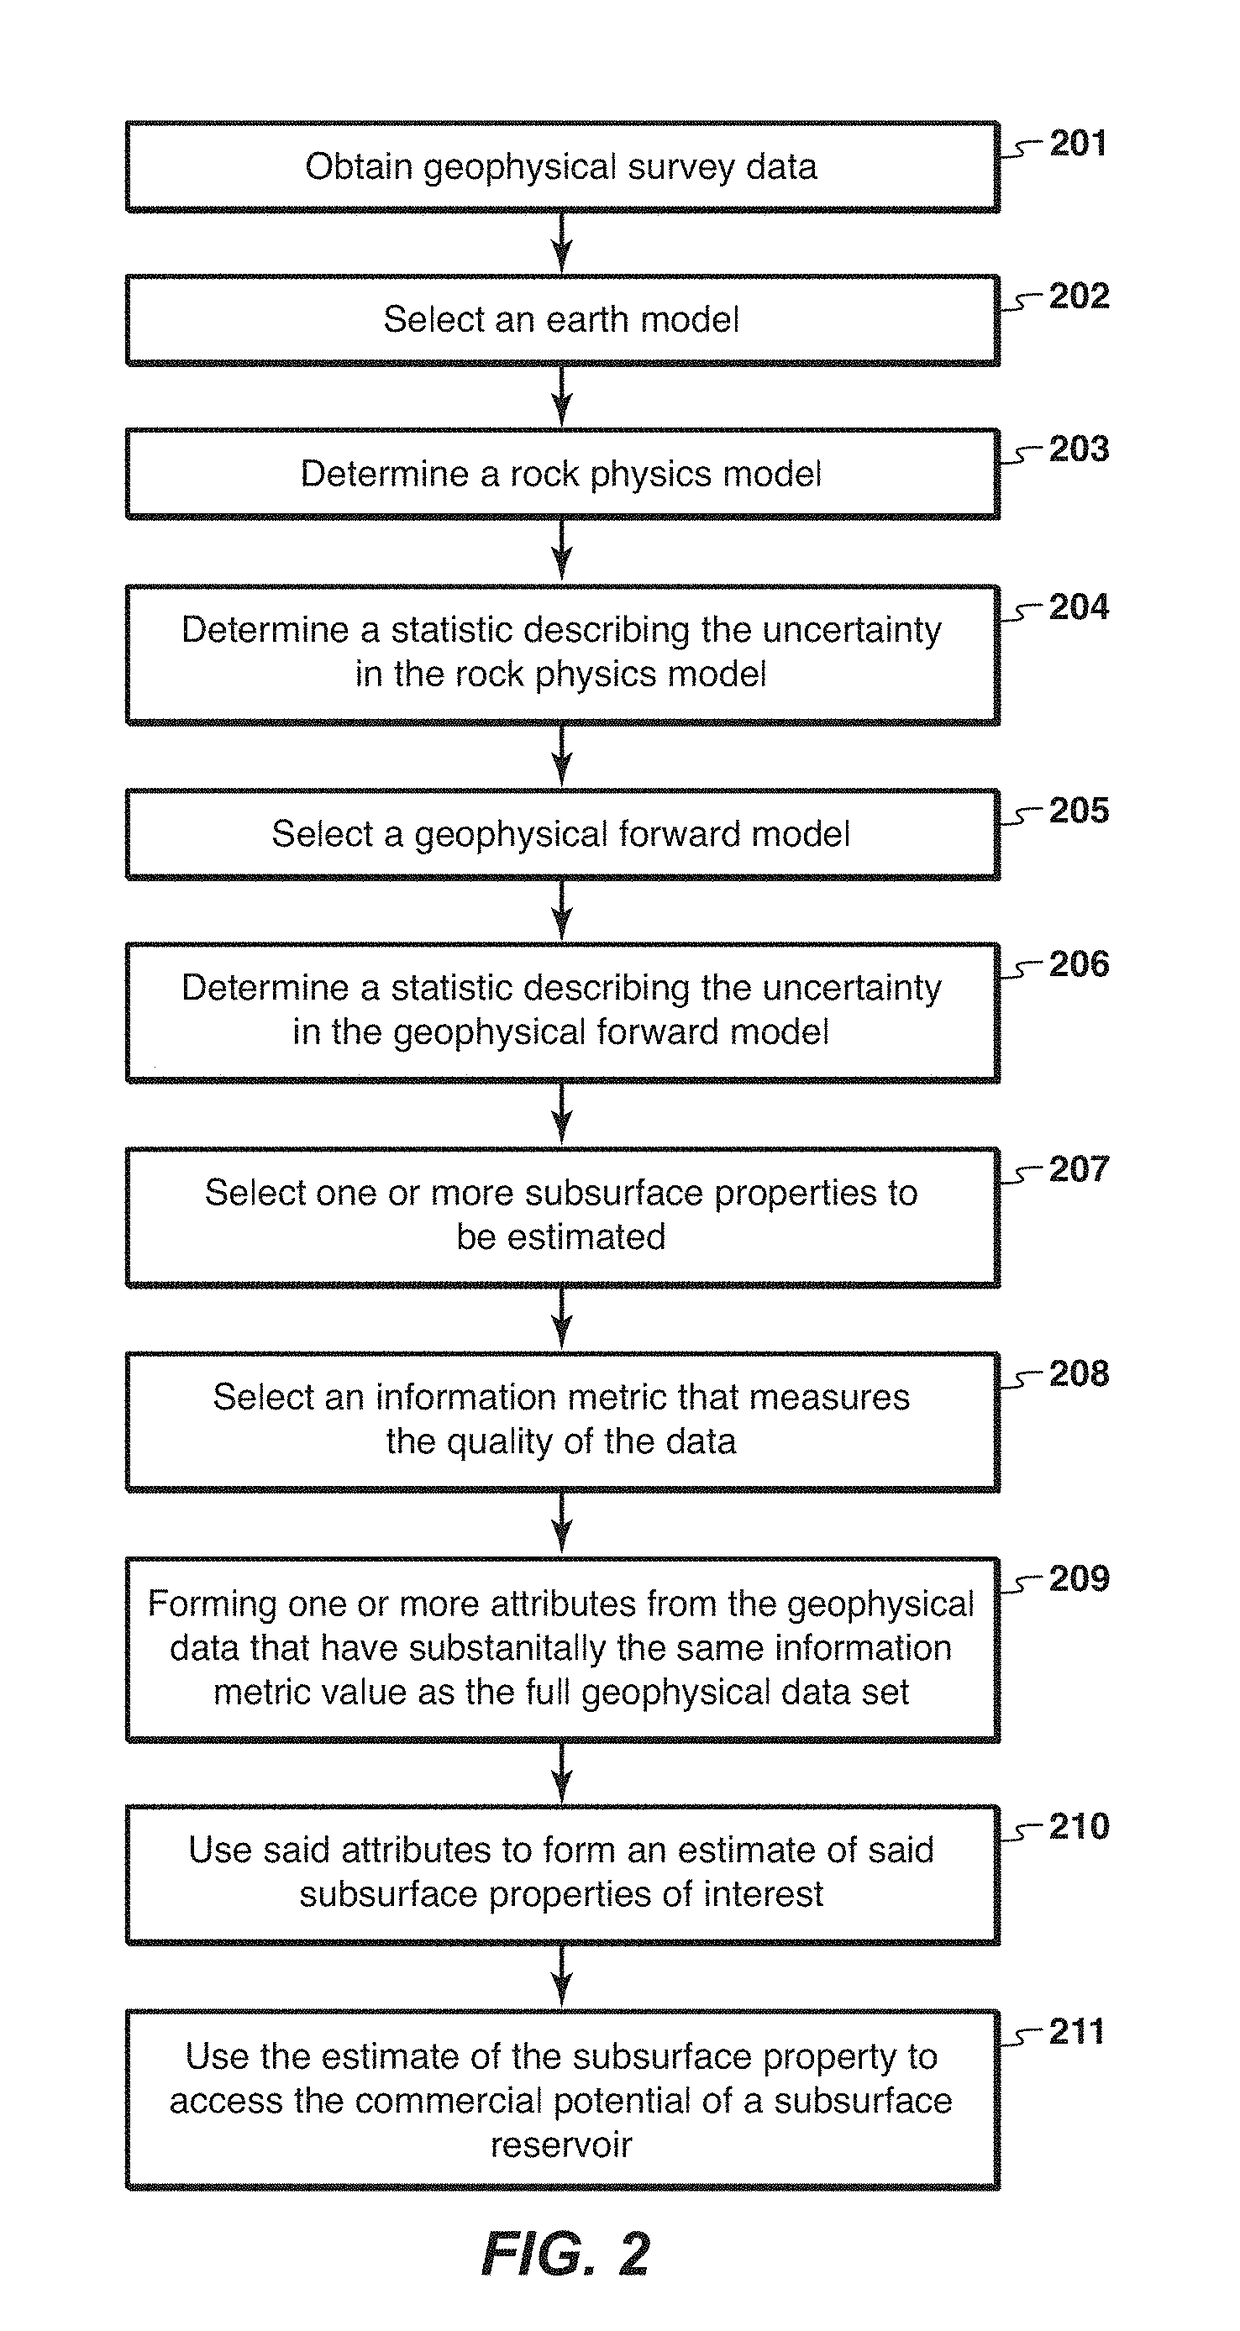 Method for estimating subsurface properties from geophysical survey data using physics-based inversion